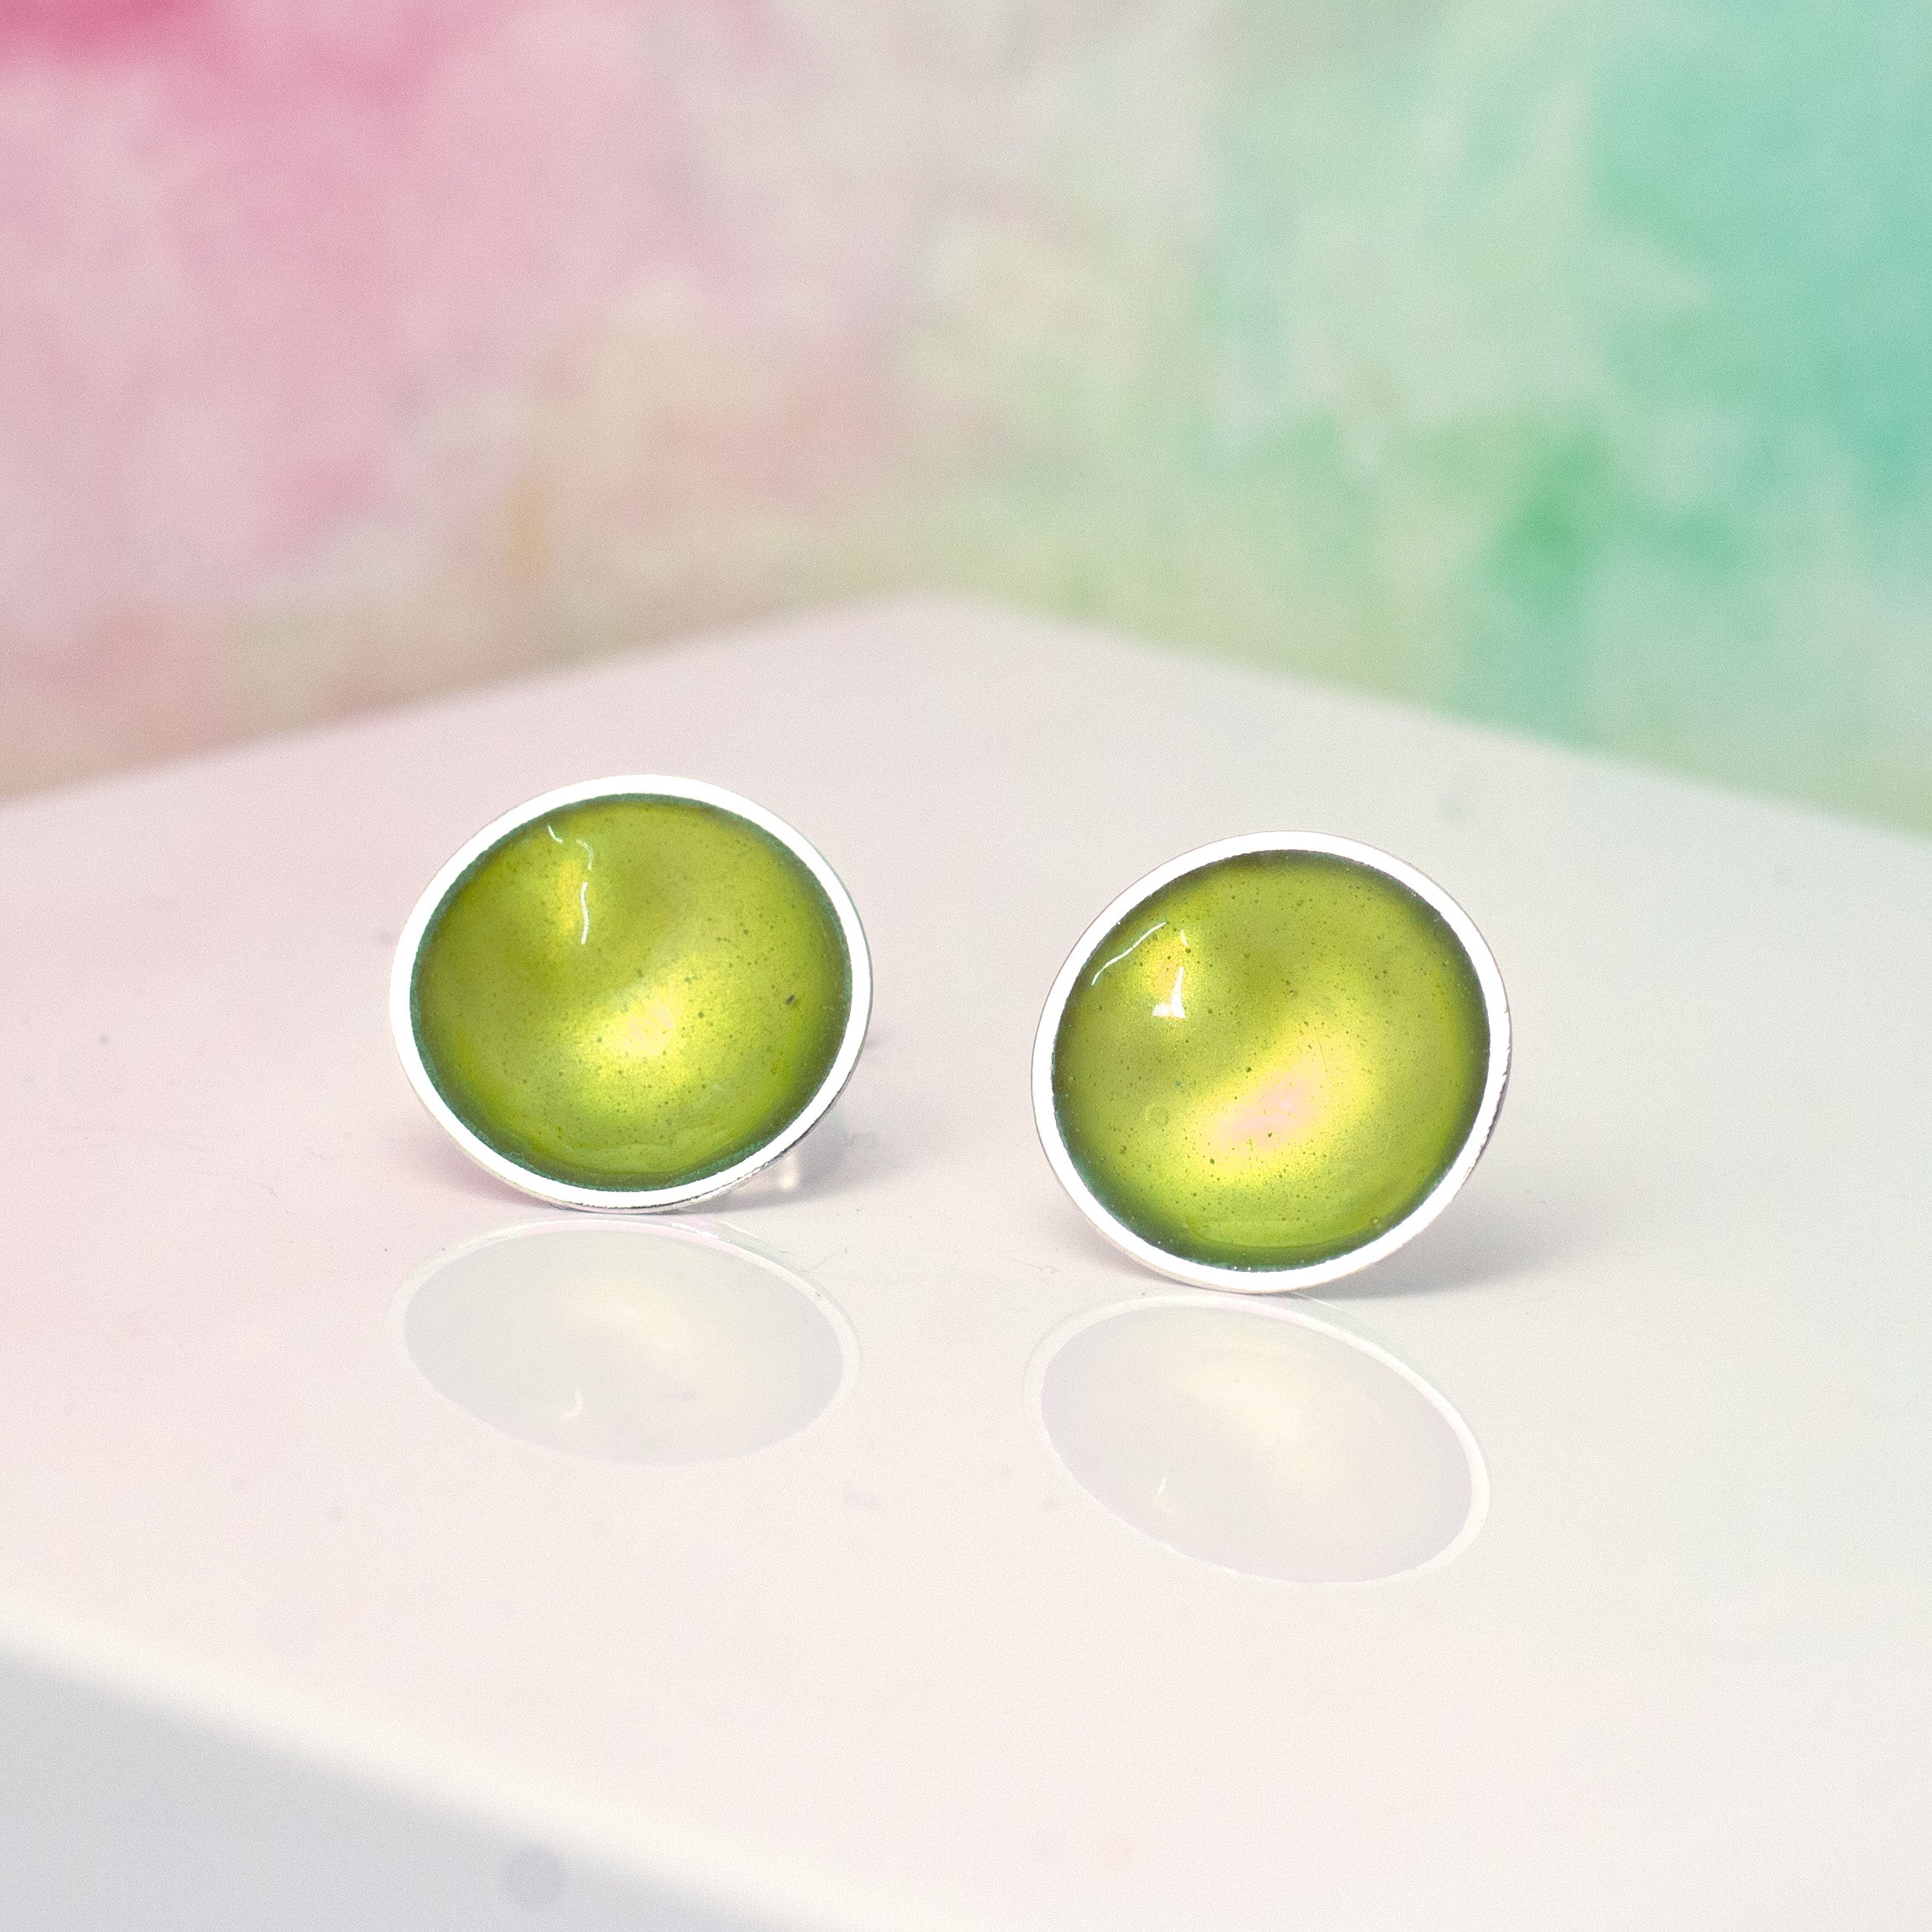 Halo Silver and Enamel Studs - Large